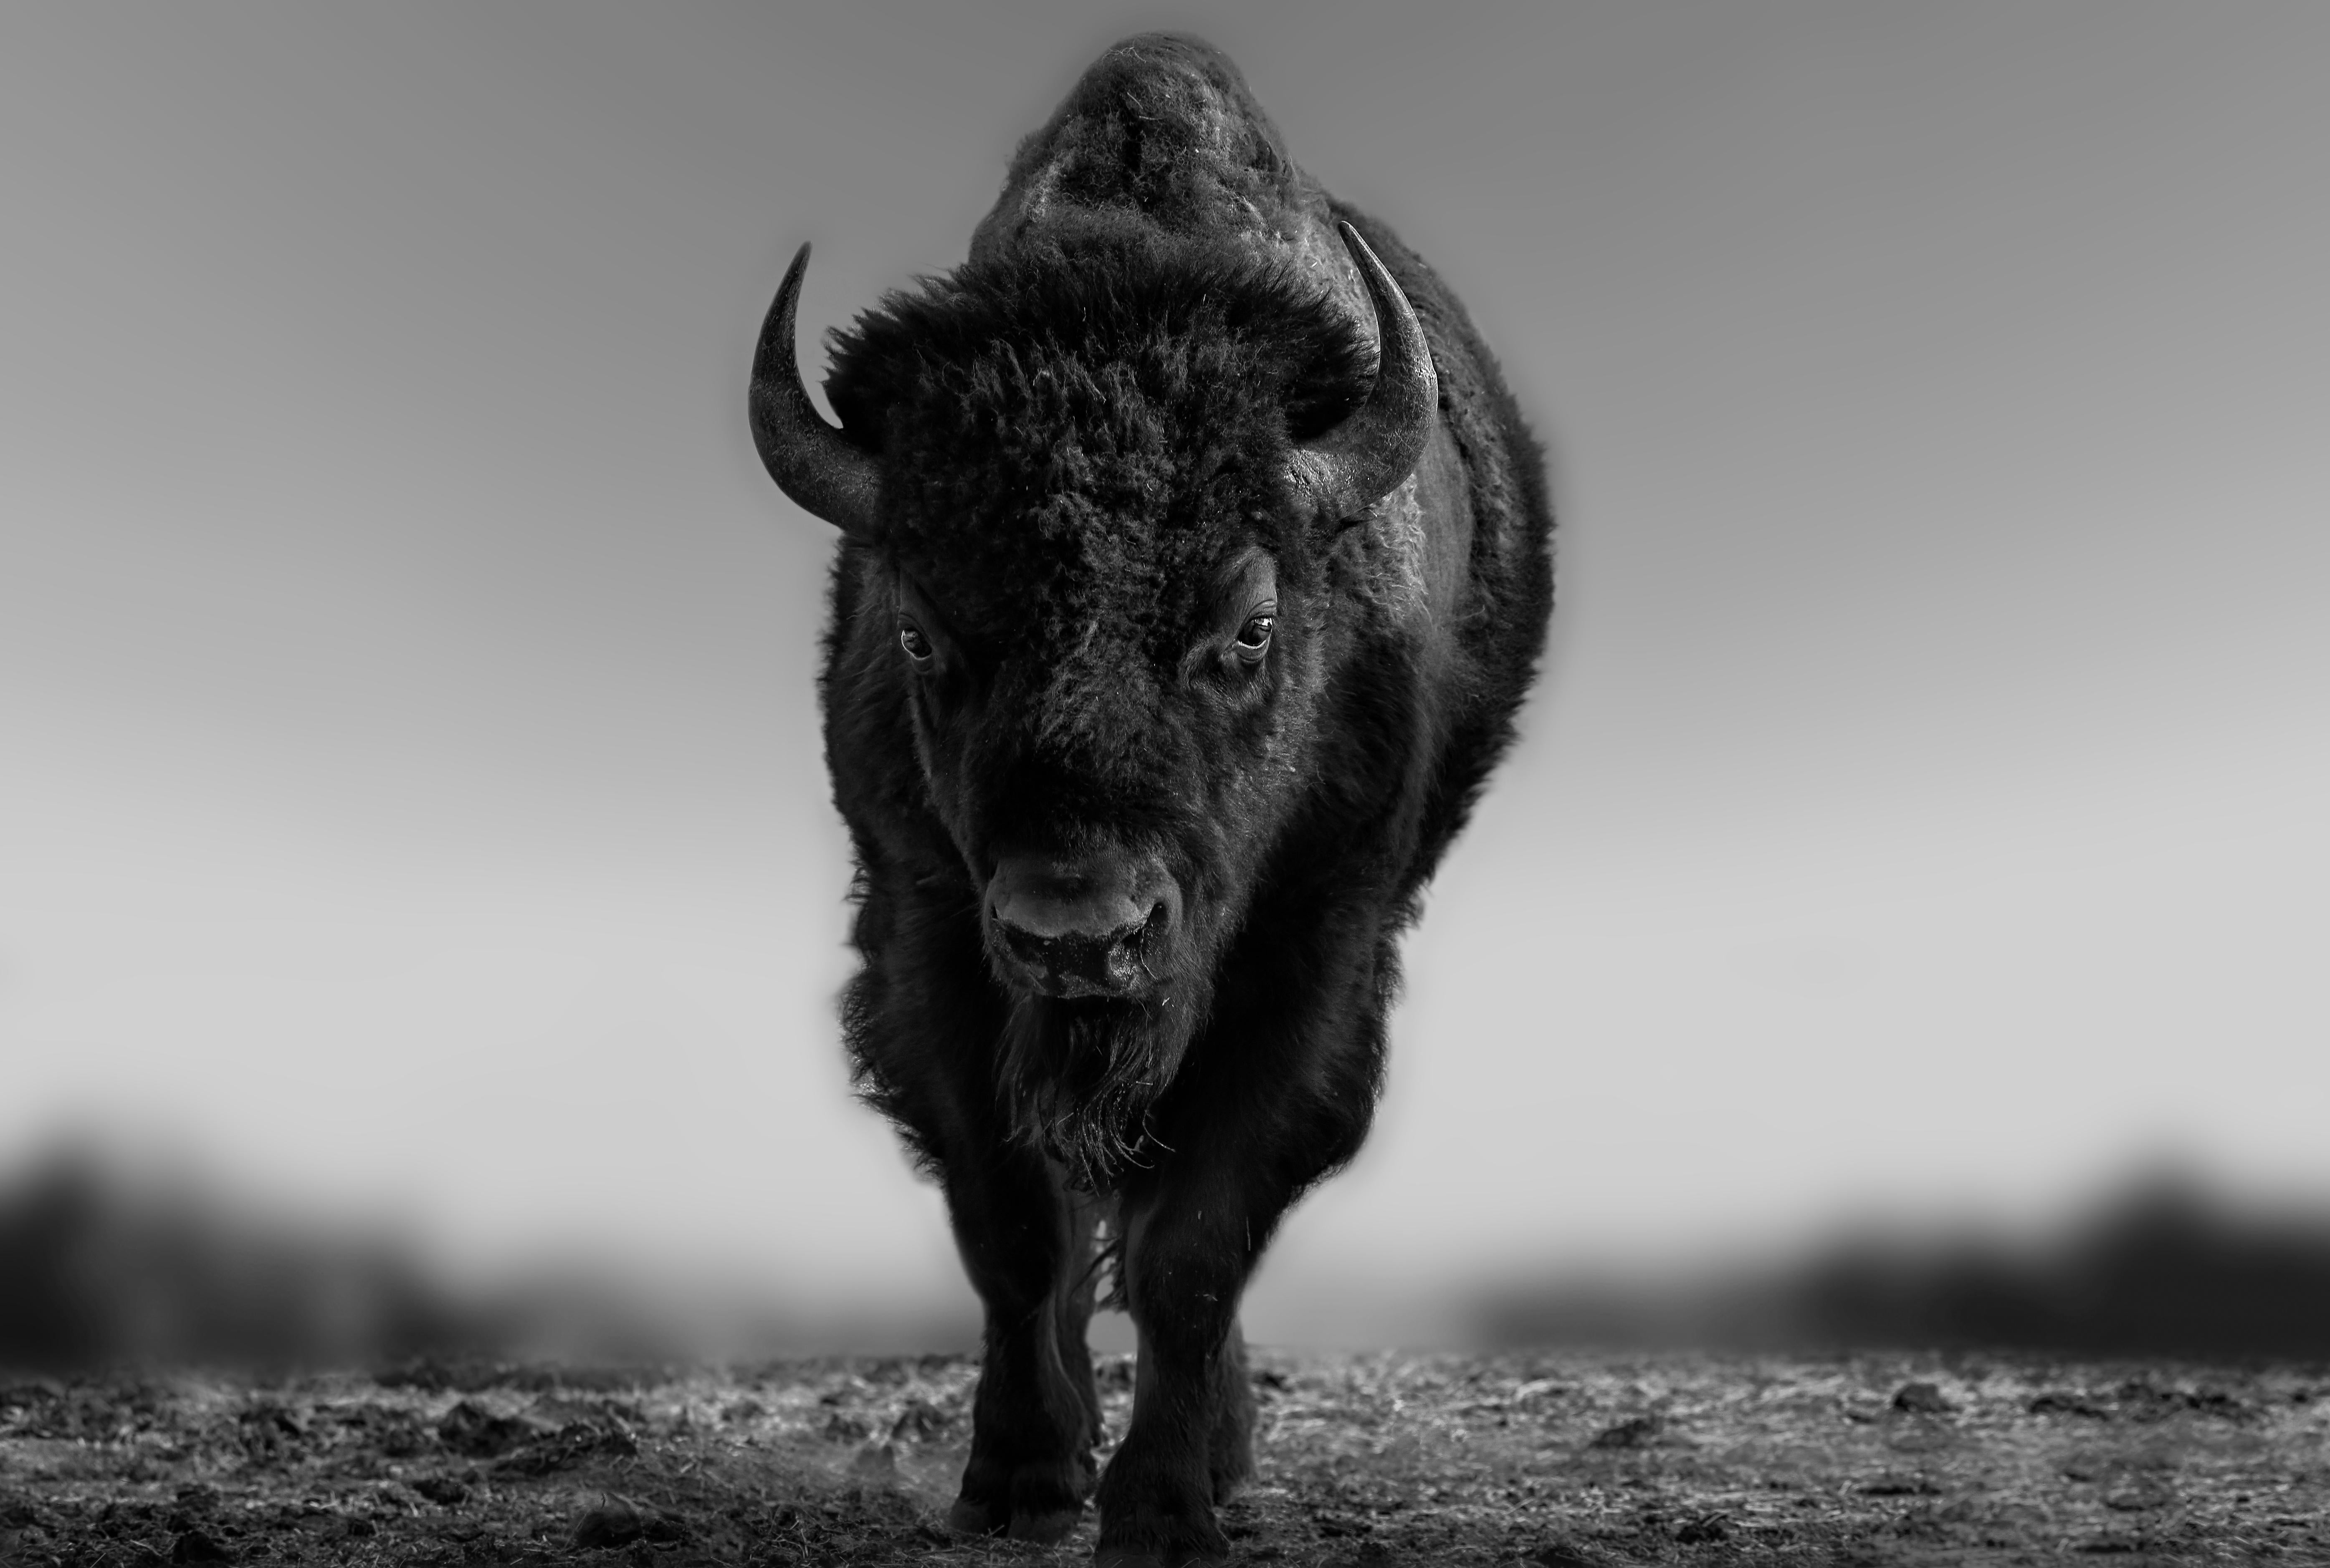 Shane Russeck Animal Print - The Beast 20x30 - Contemporary Black and White Photograph of Bison